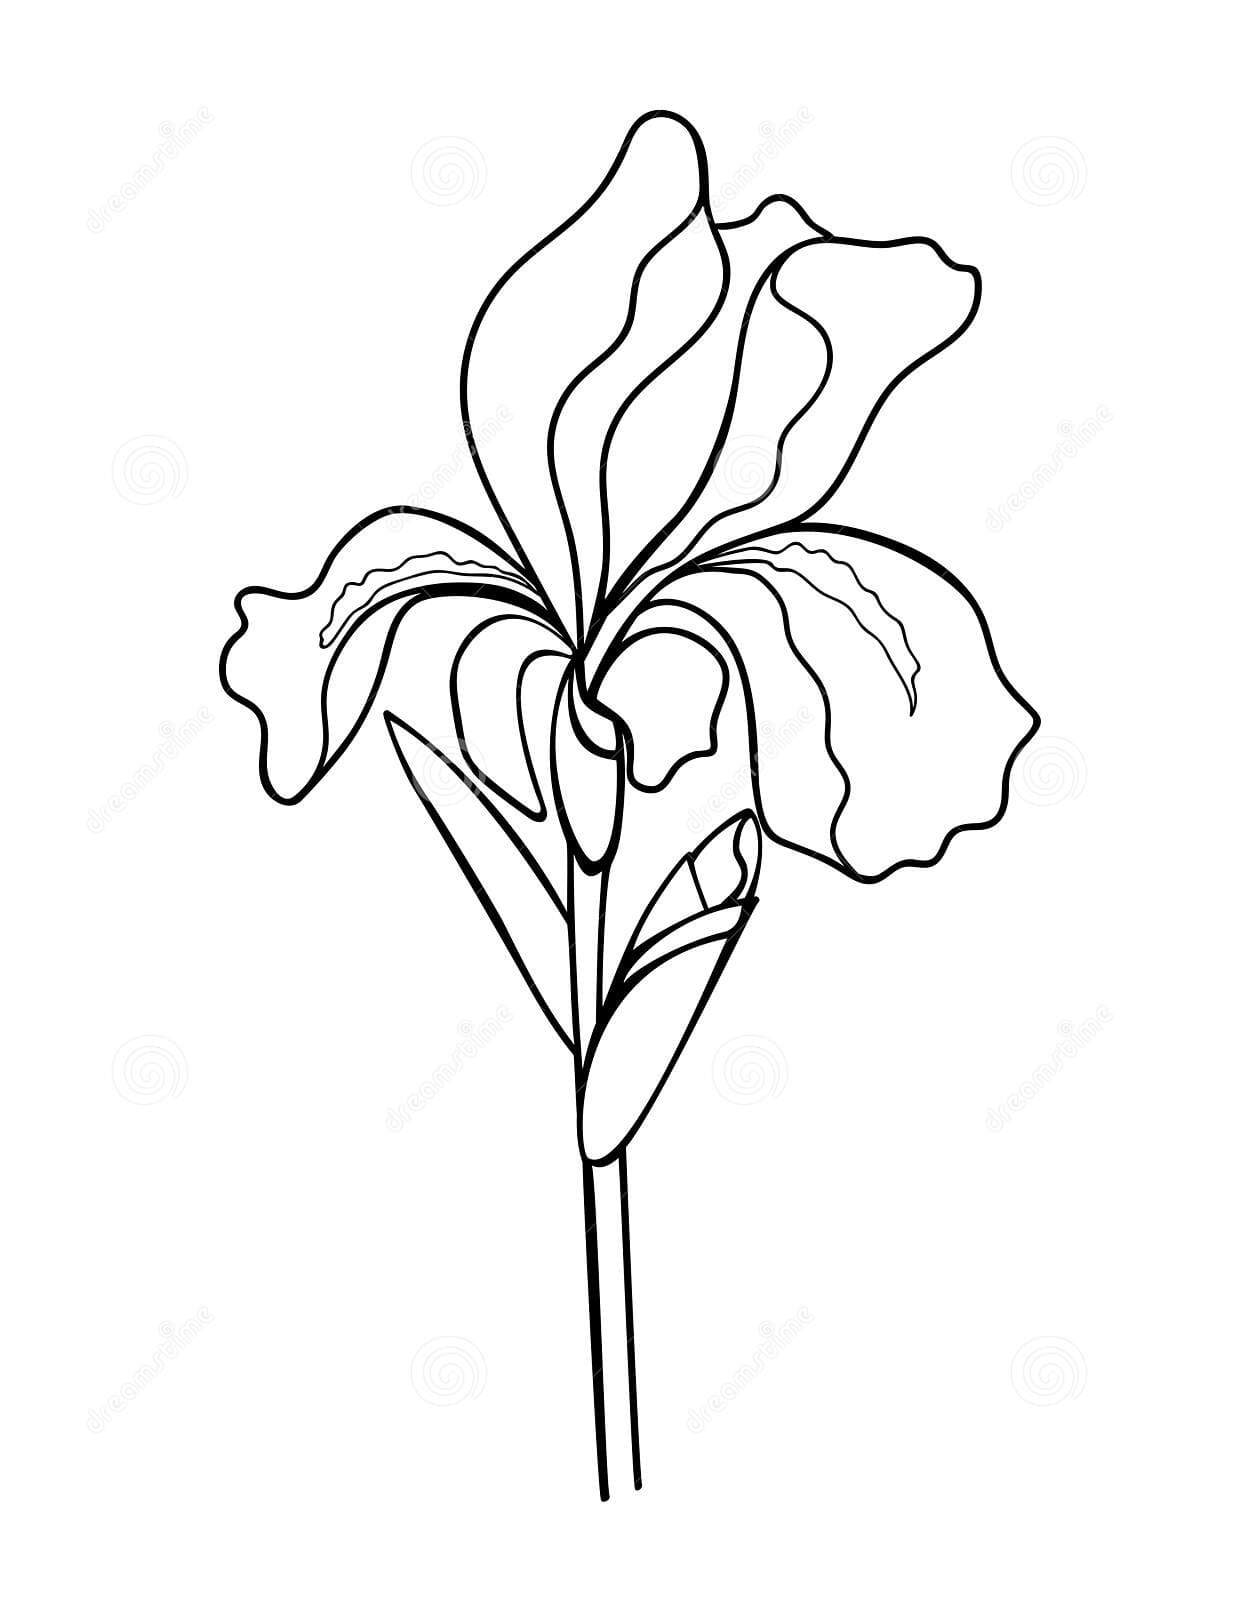 Iris Flower With A Bud Image